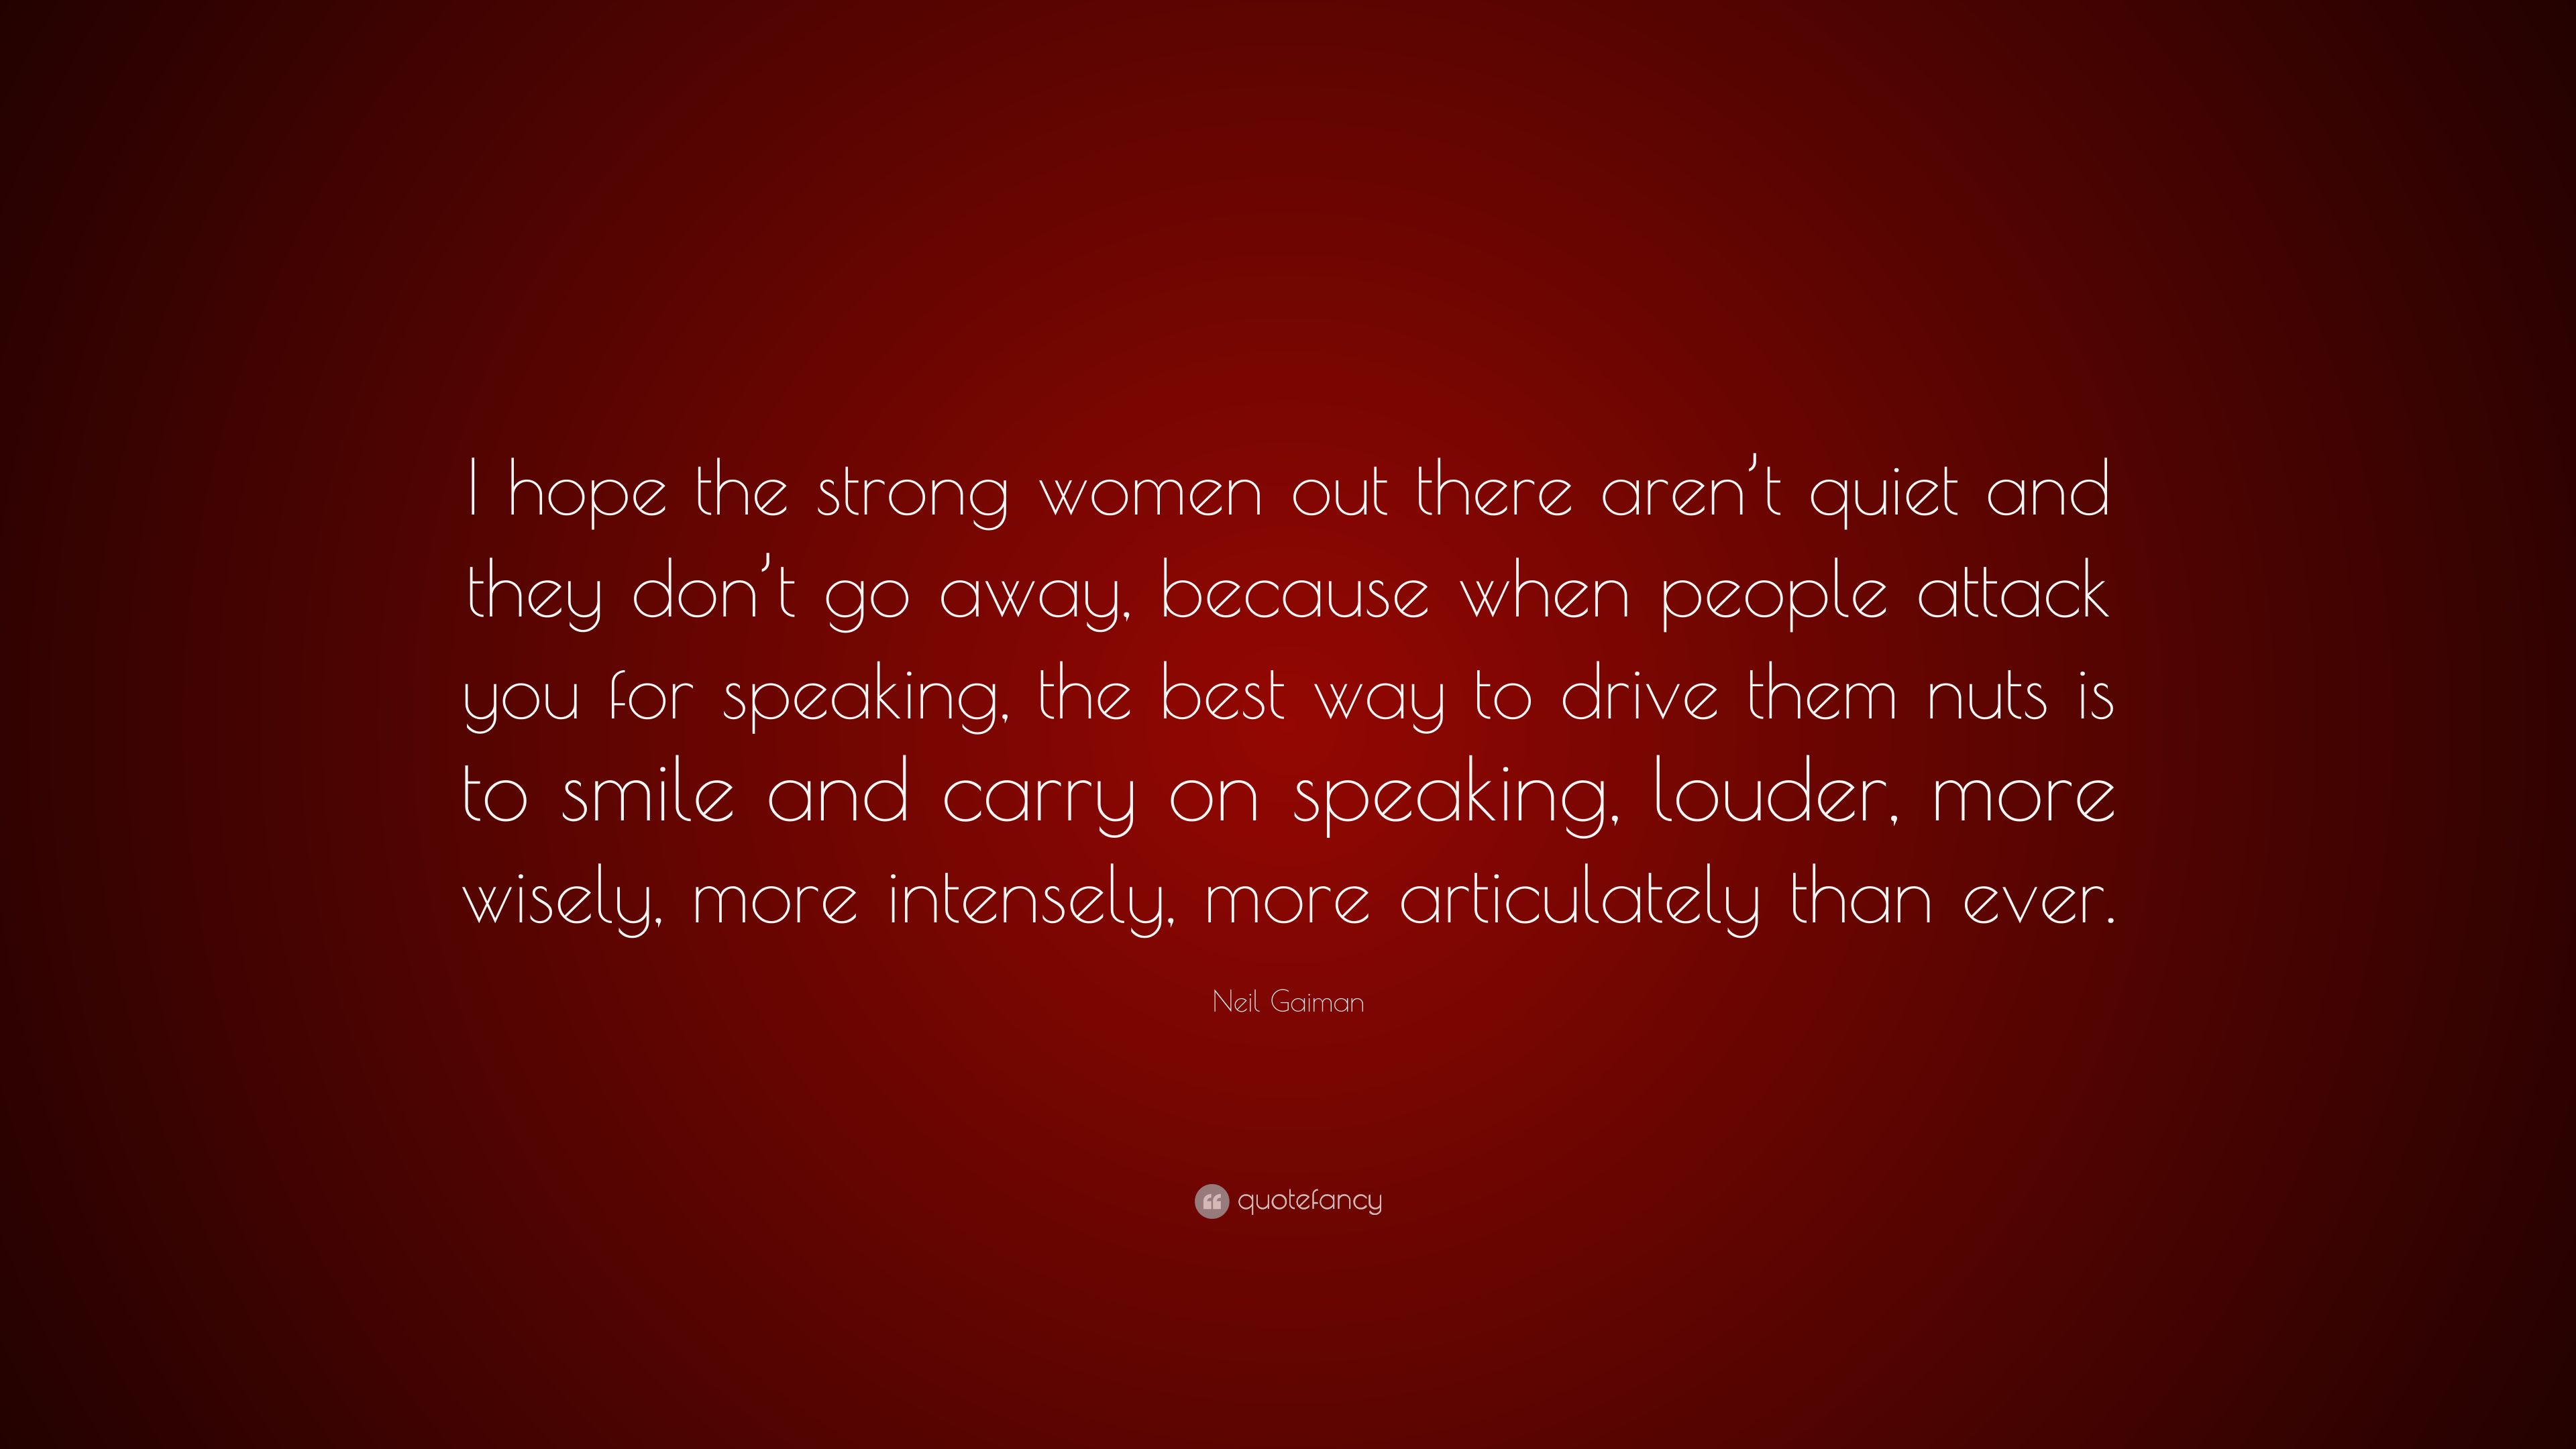 Neil Gaiman Quote: “I hope the strong women out there aren't quiet and they don't go away, because when people attack you for speaking, ” (10 wallpaper)